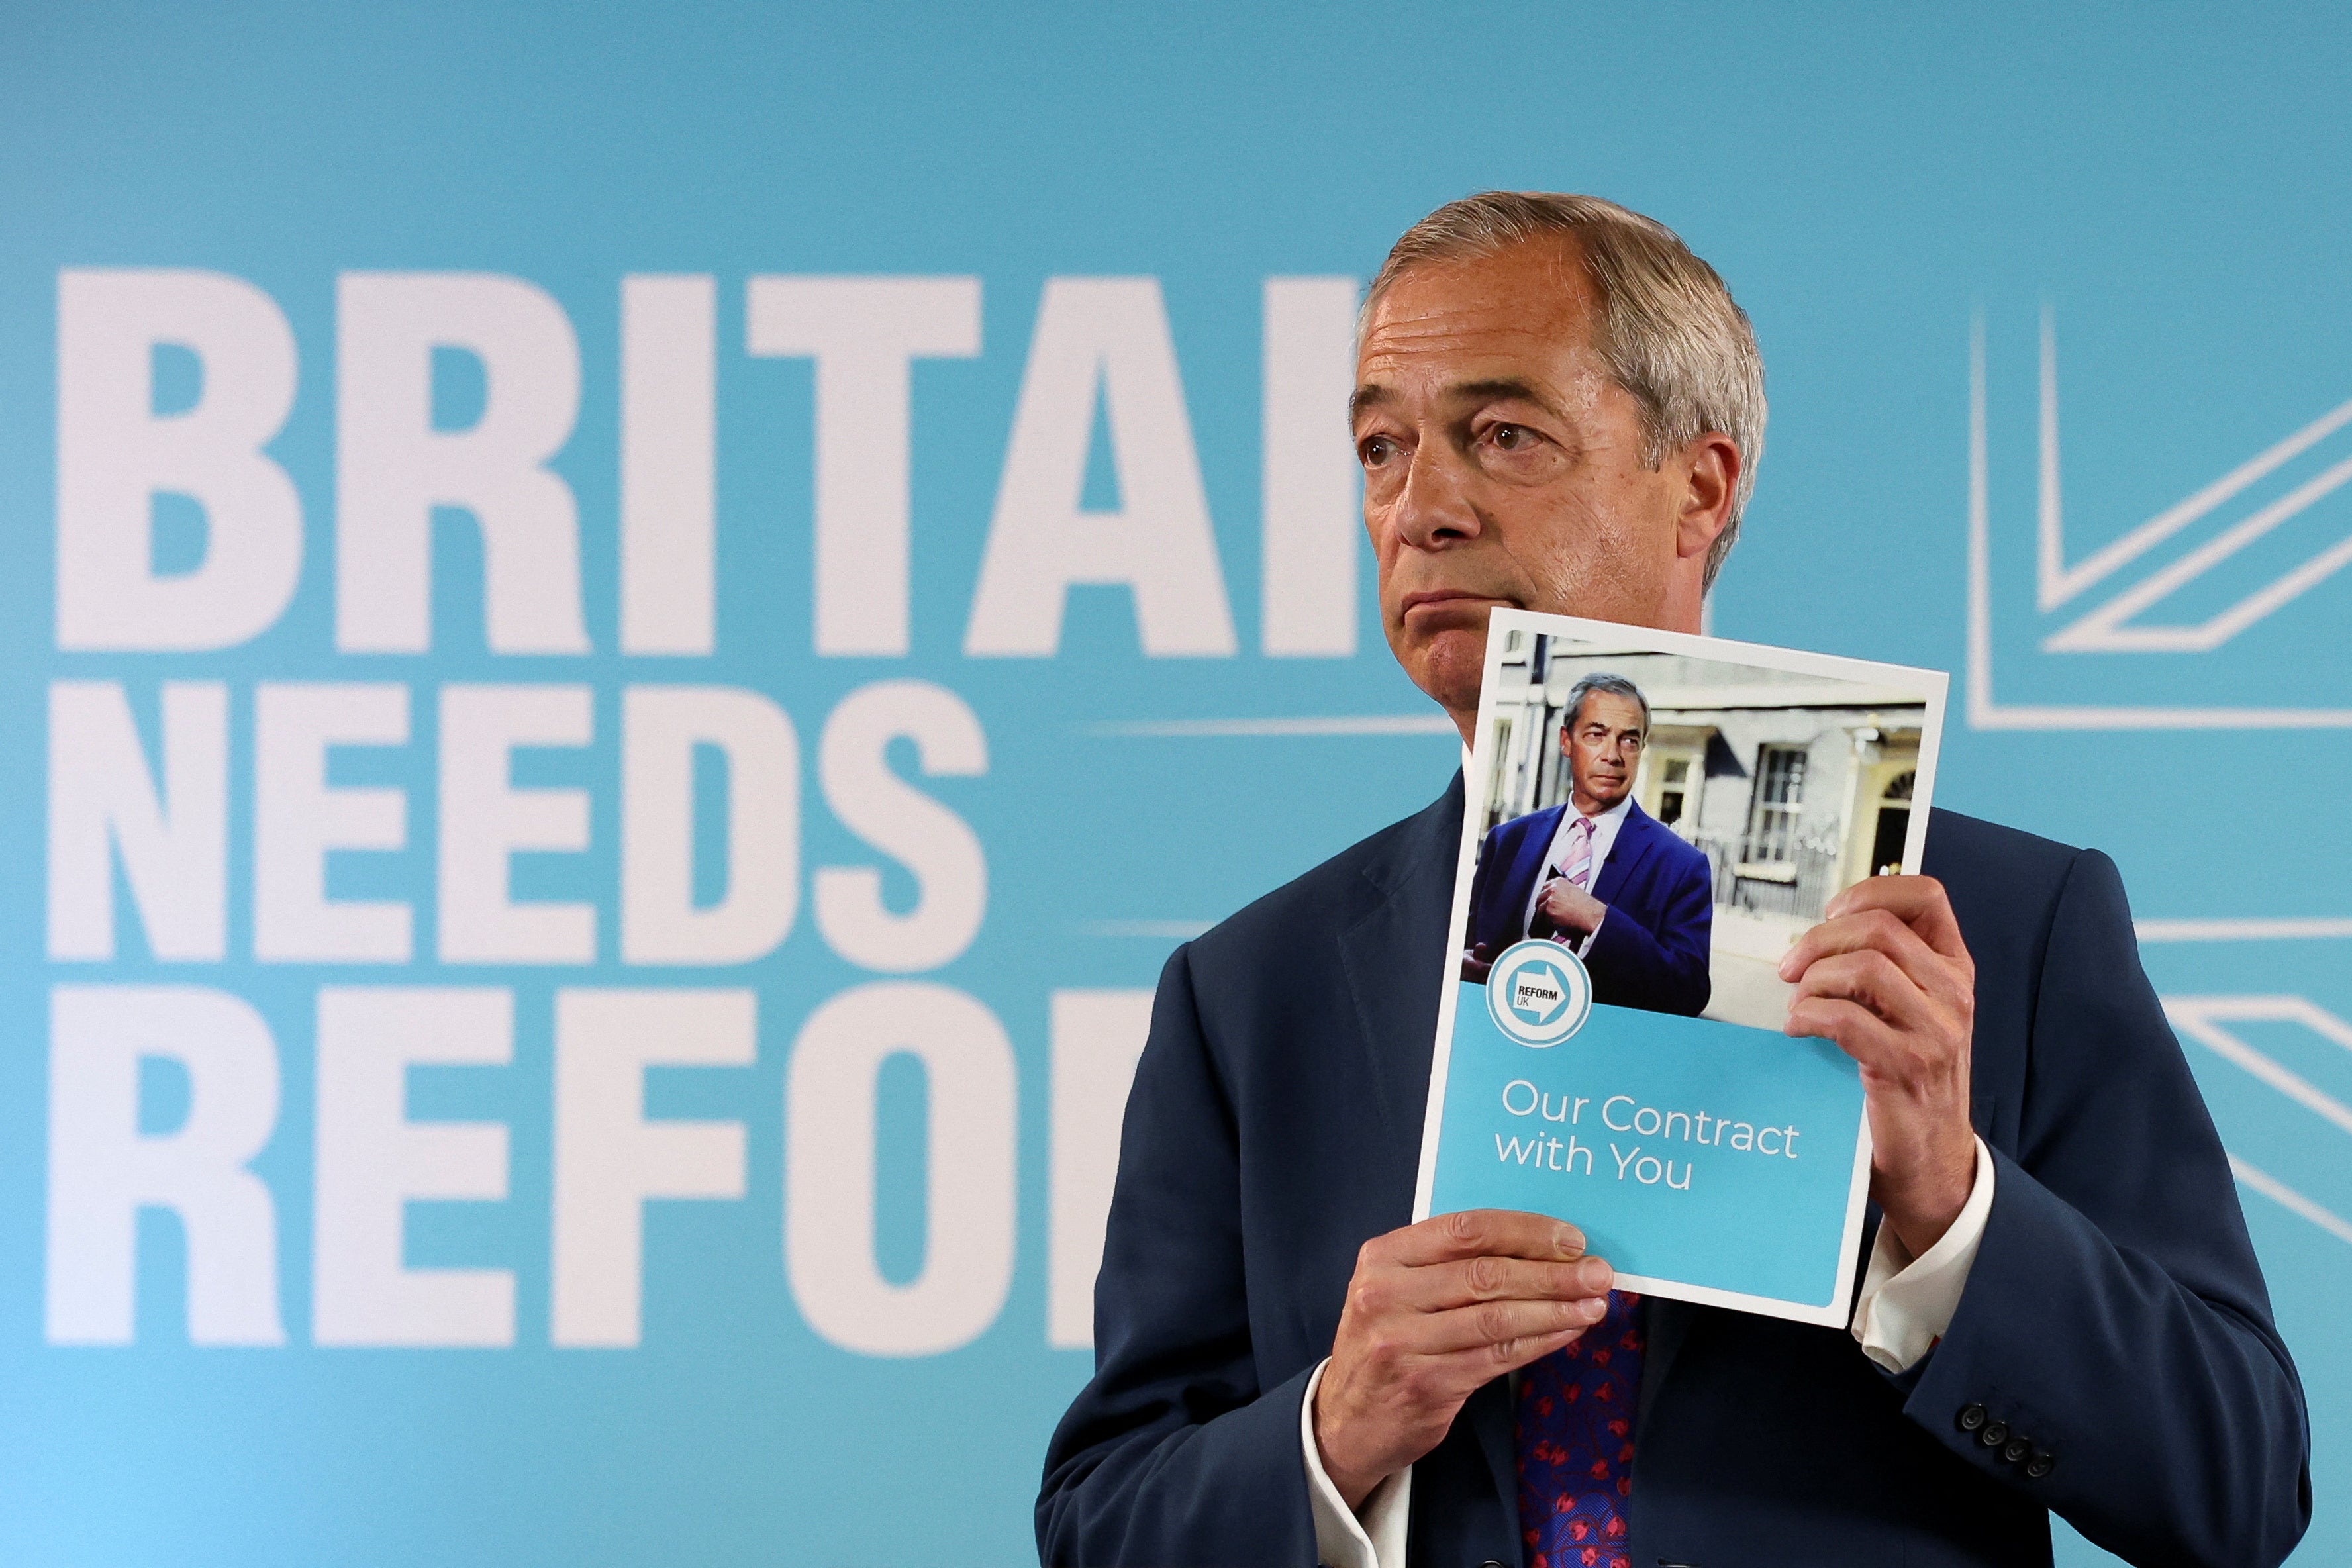 nigel farage, polls, general election, politics, rishi sunak, sir keir starmer, reform uk, labour, general election latest: farage’s reform manifesto called ‘unserious’ for spending three times more than truss